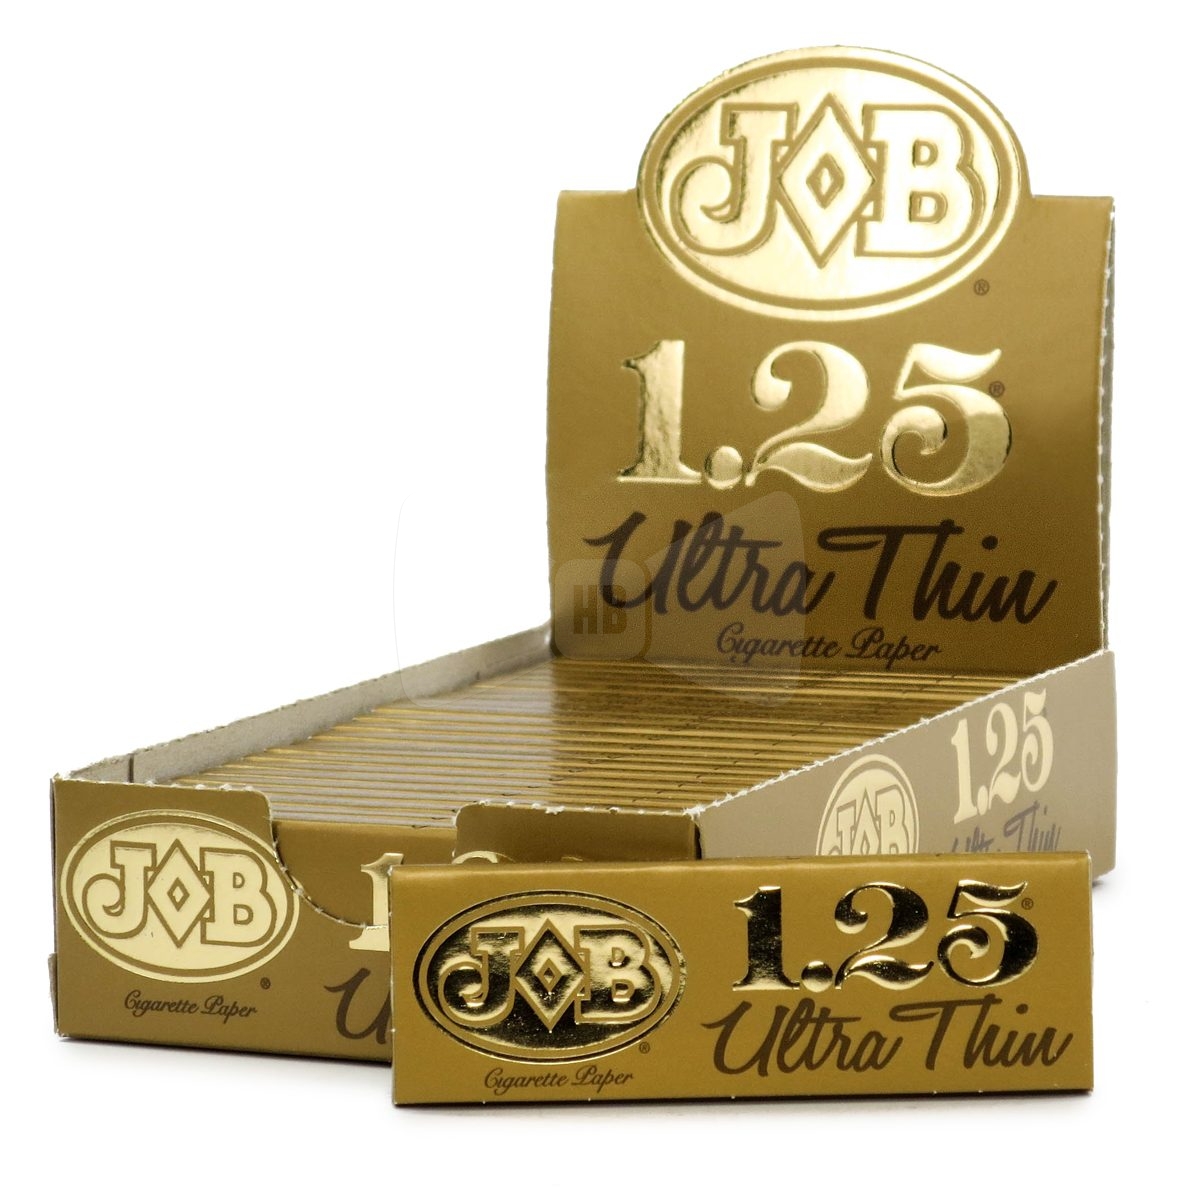 JOB 1.25 Gold Ultra Thin Rolling Papers Box